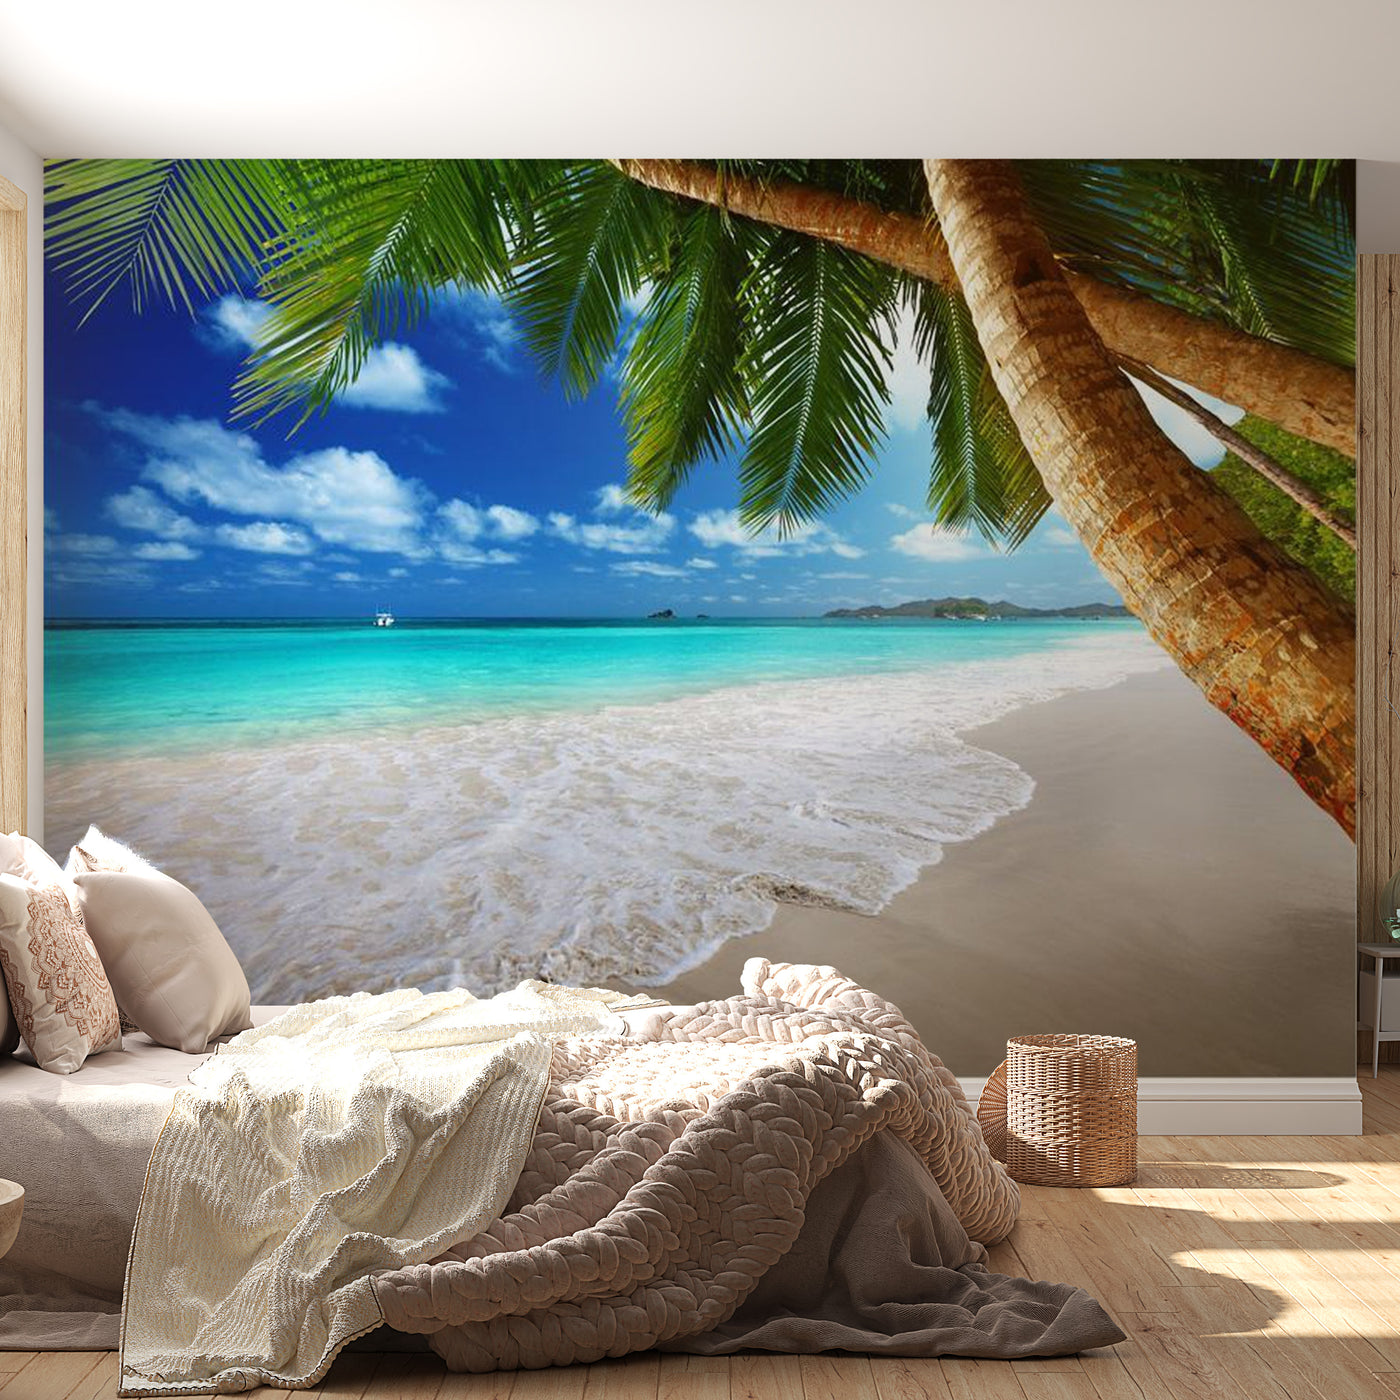 Peel & Stick Beach Wall Mural - Tropical Island - Removable Wall Decals